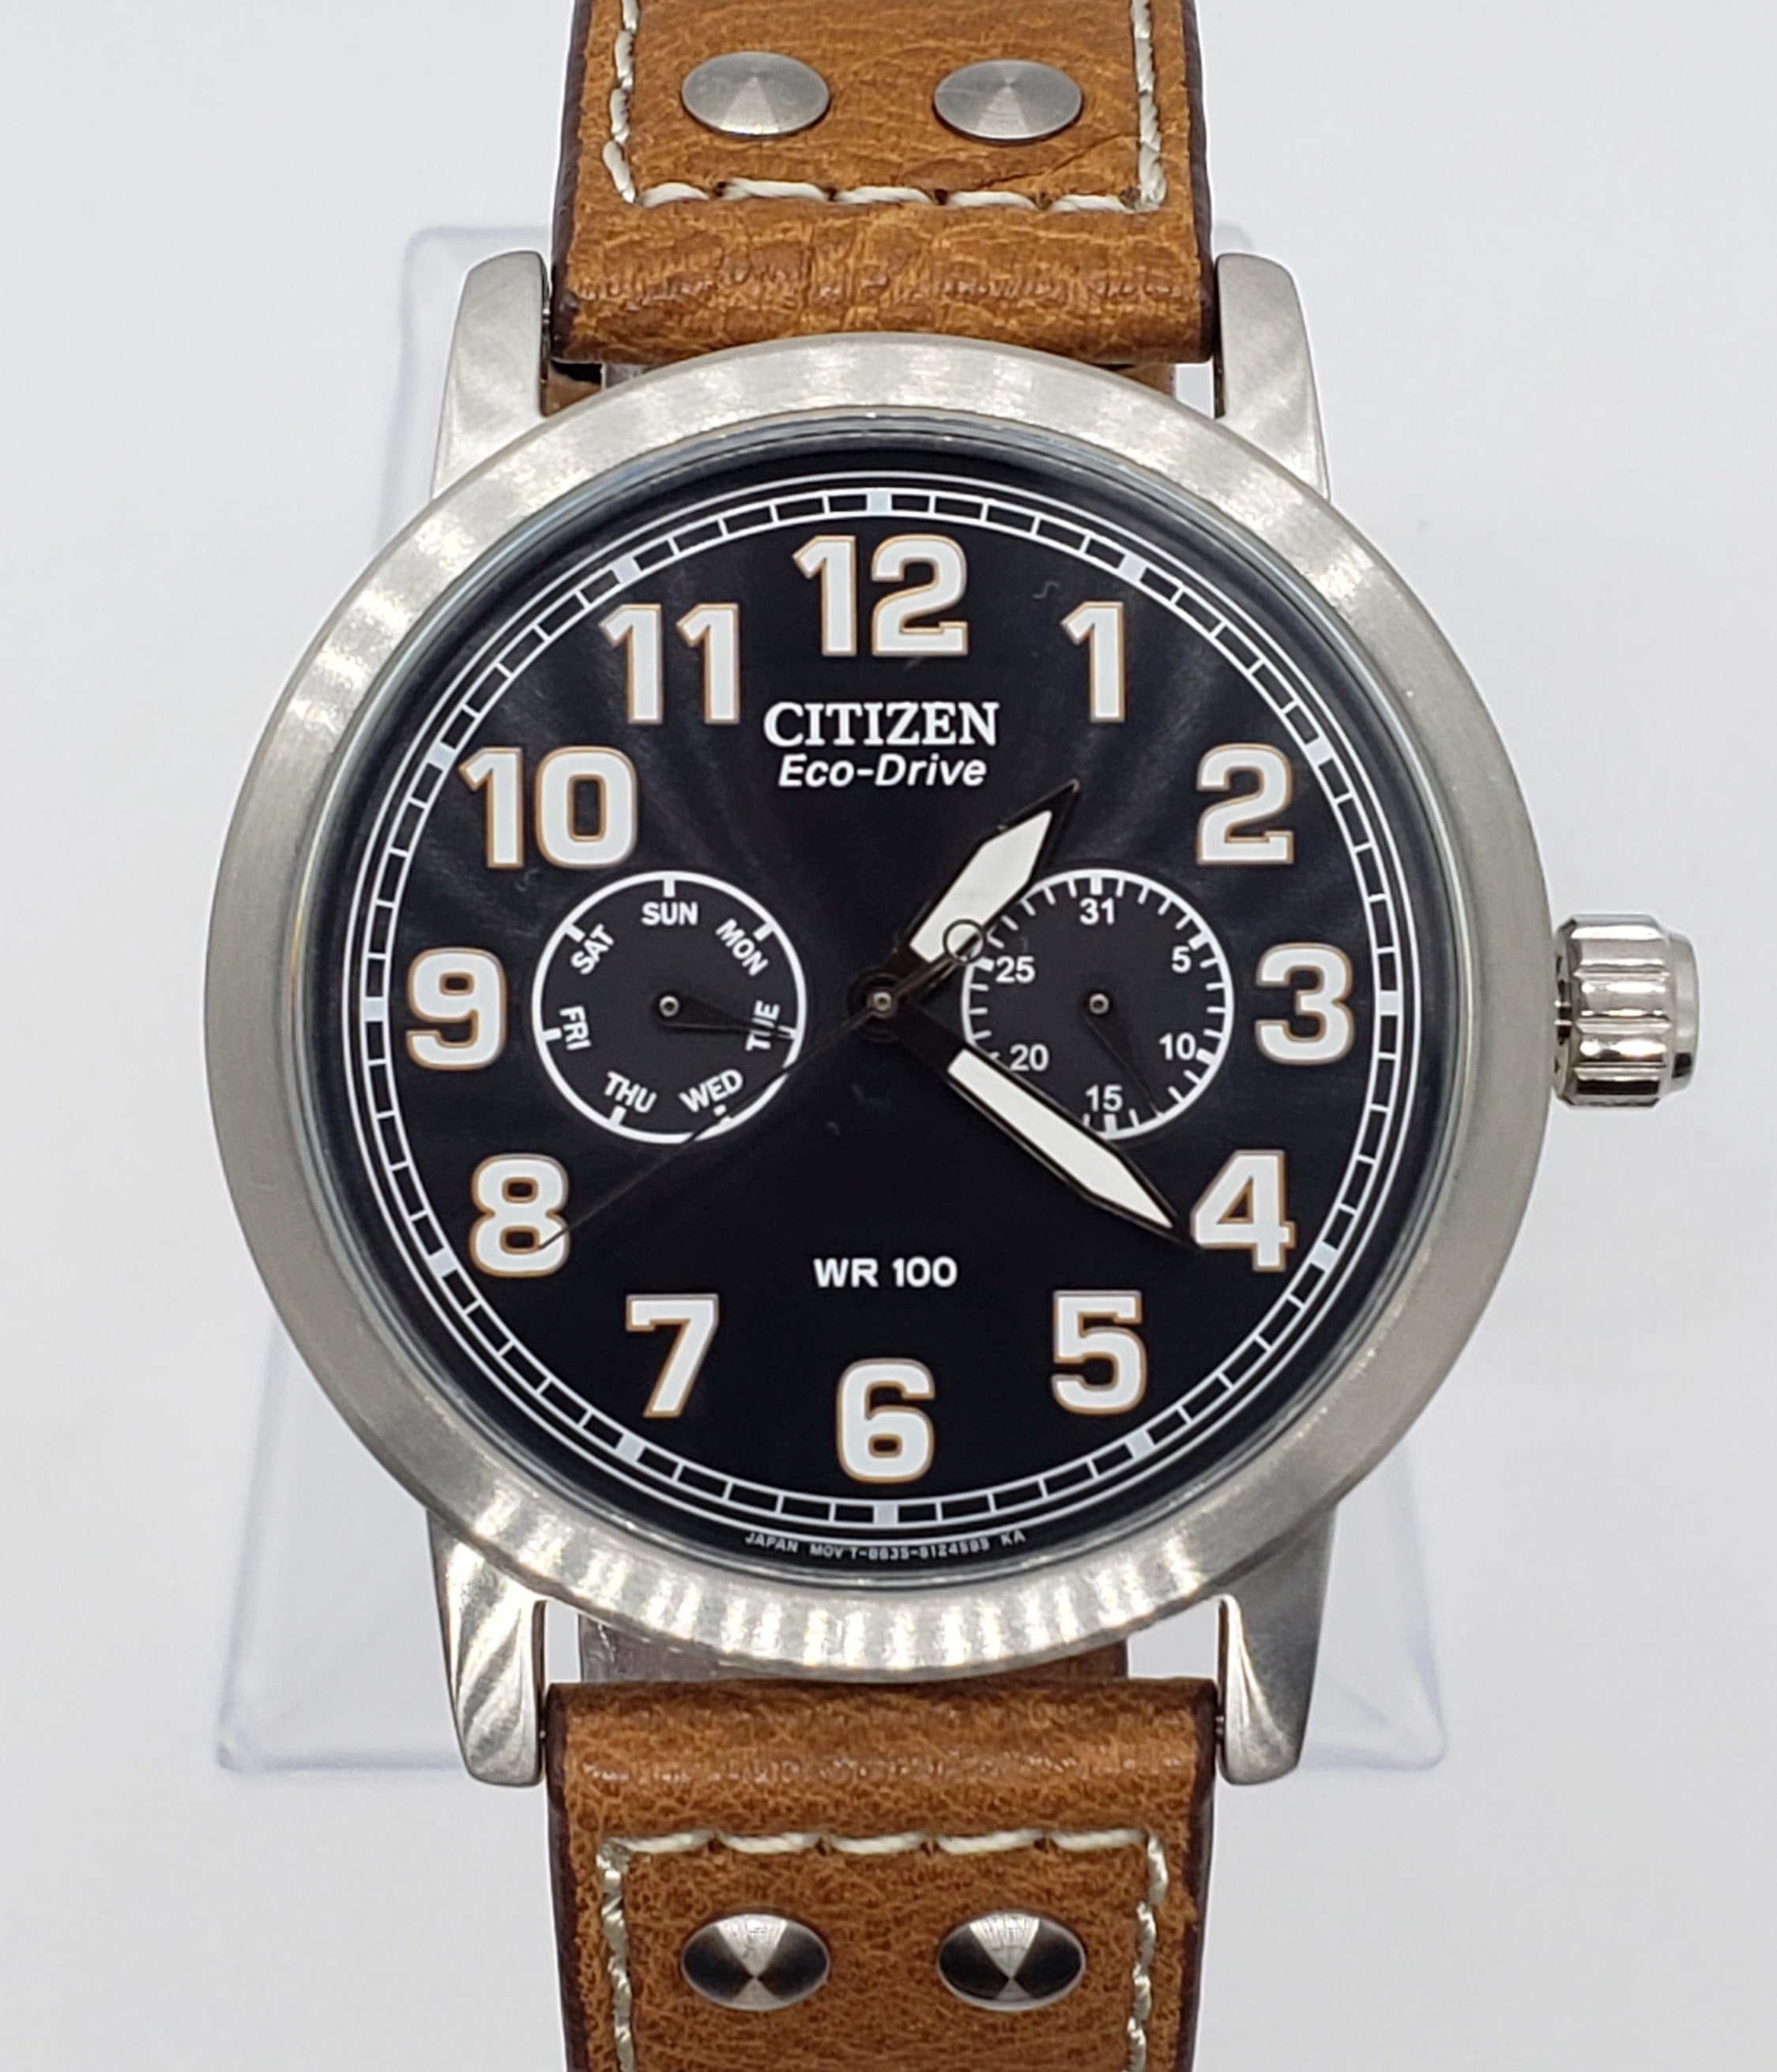 Citizen Eco-Drive Men's Day-Date Watch